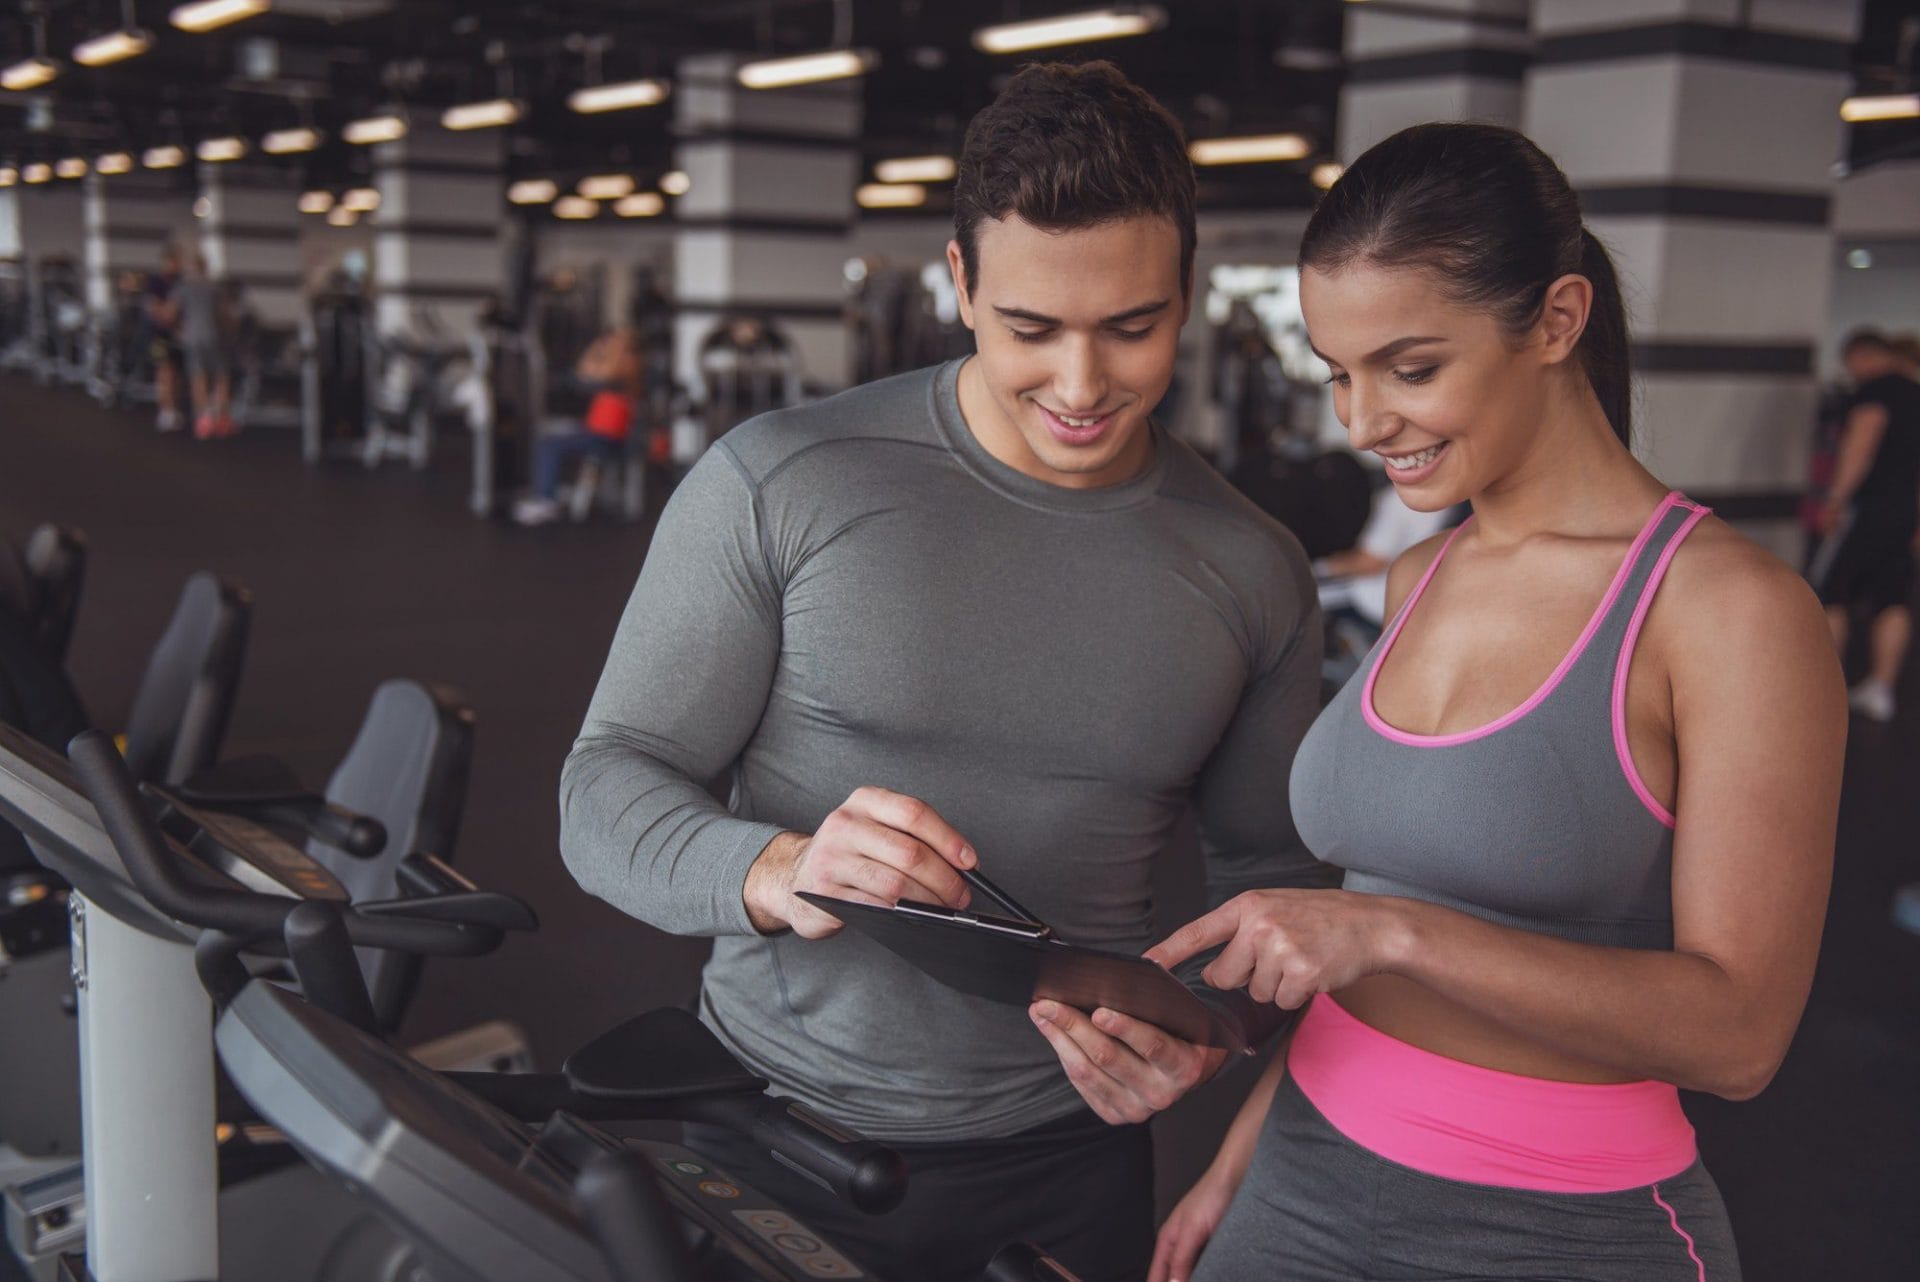 Blog: Gym Marketing Ideas to Attract More Members